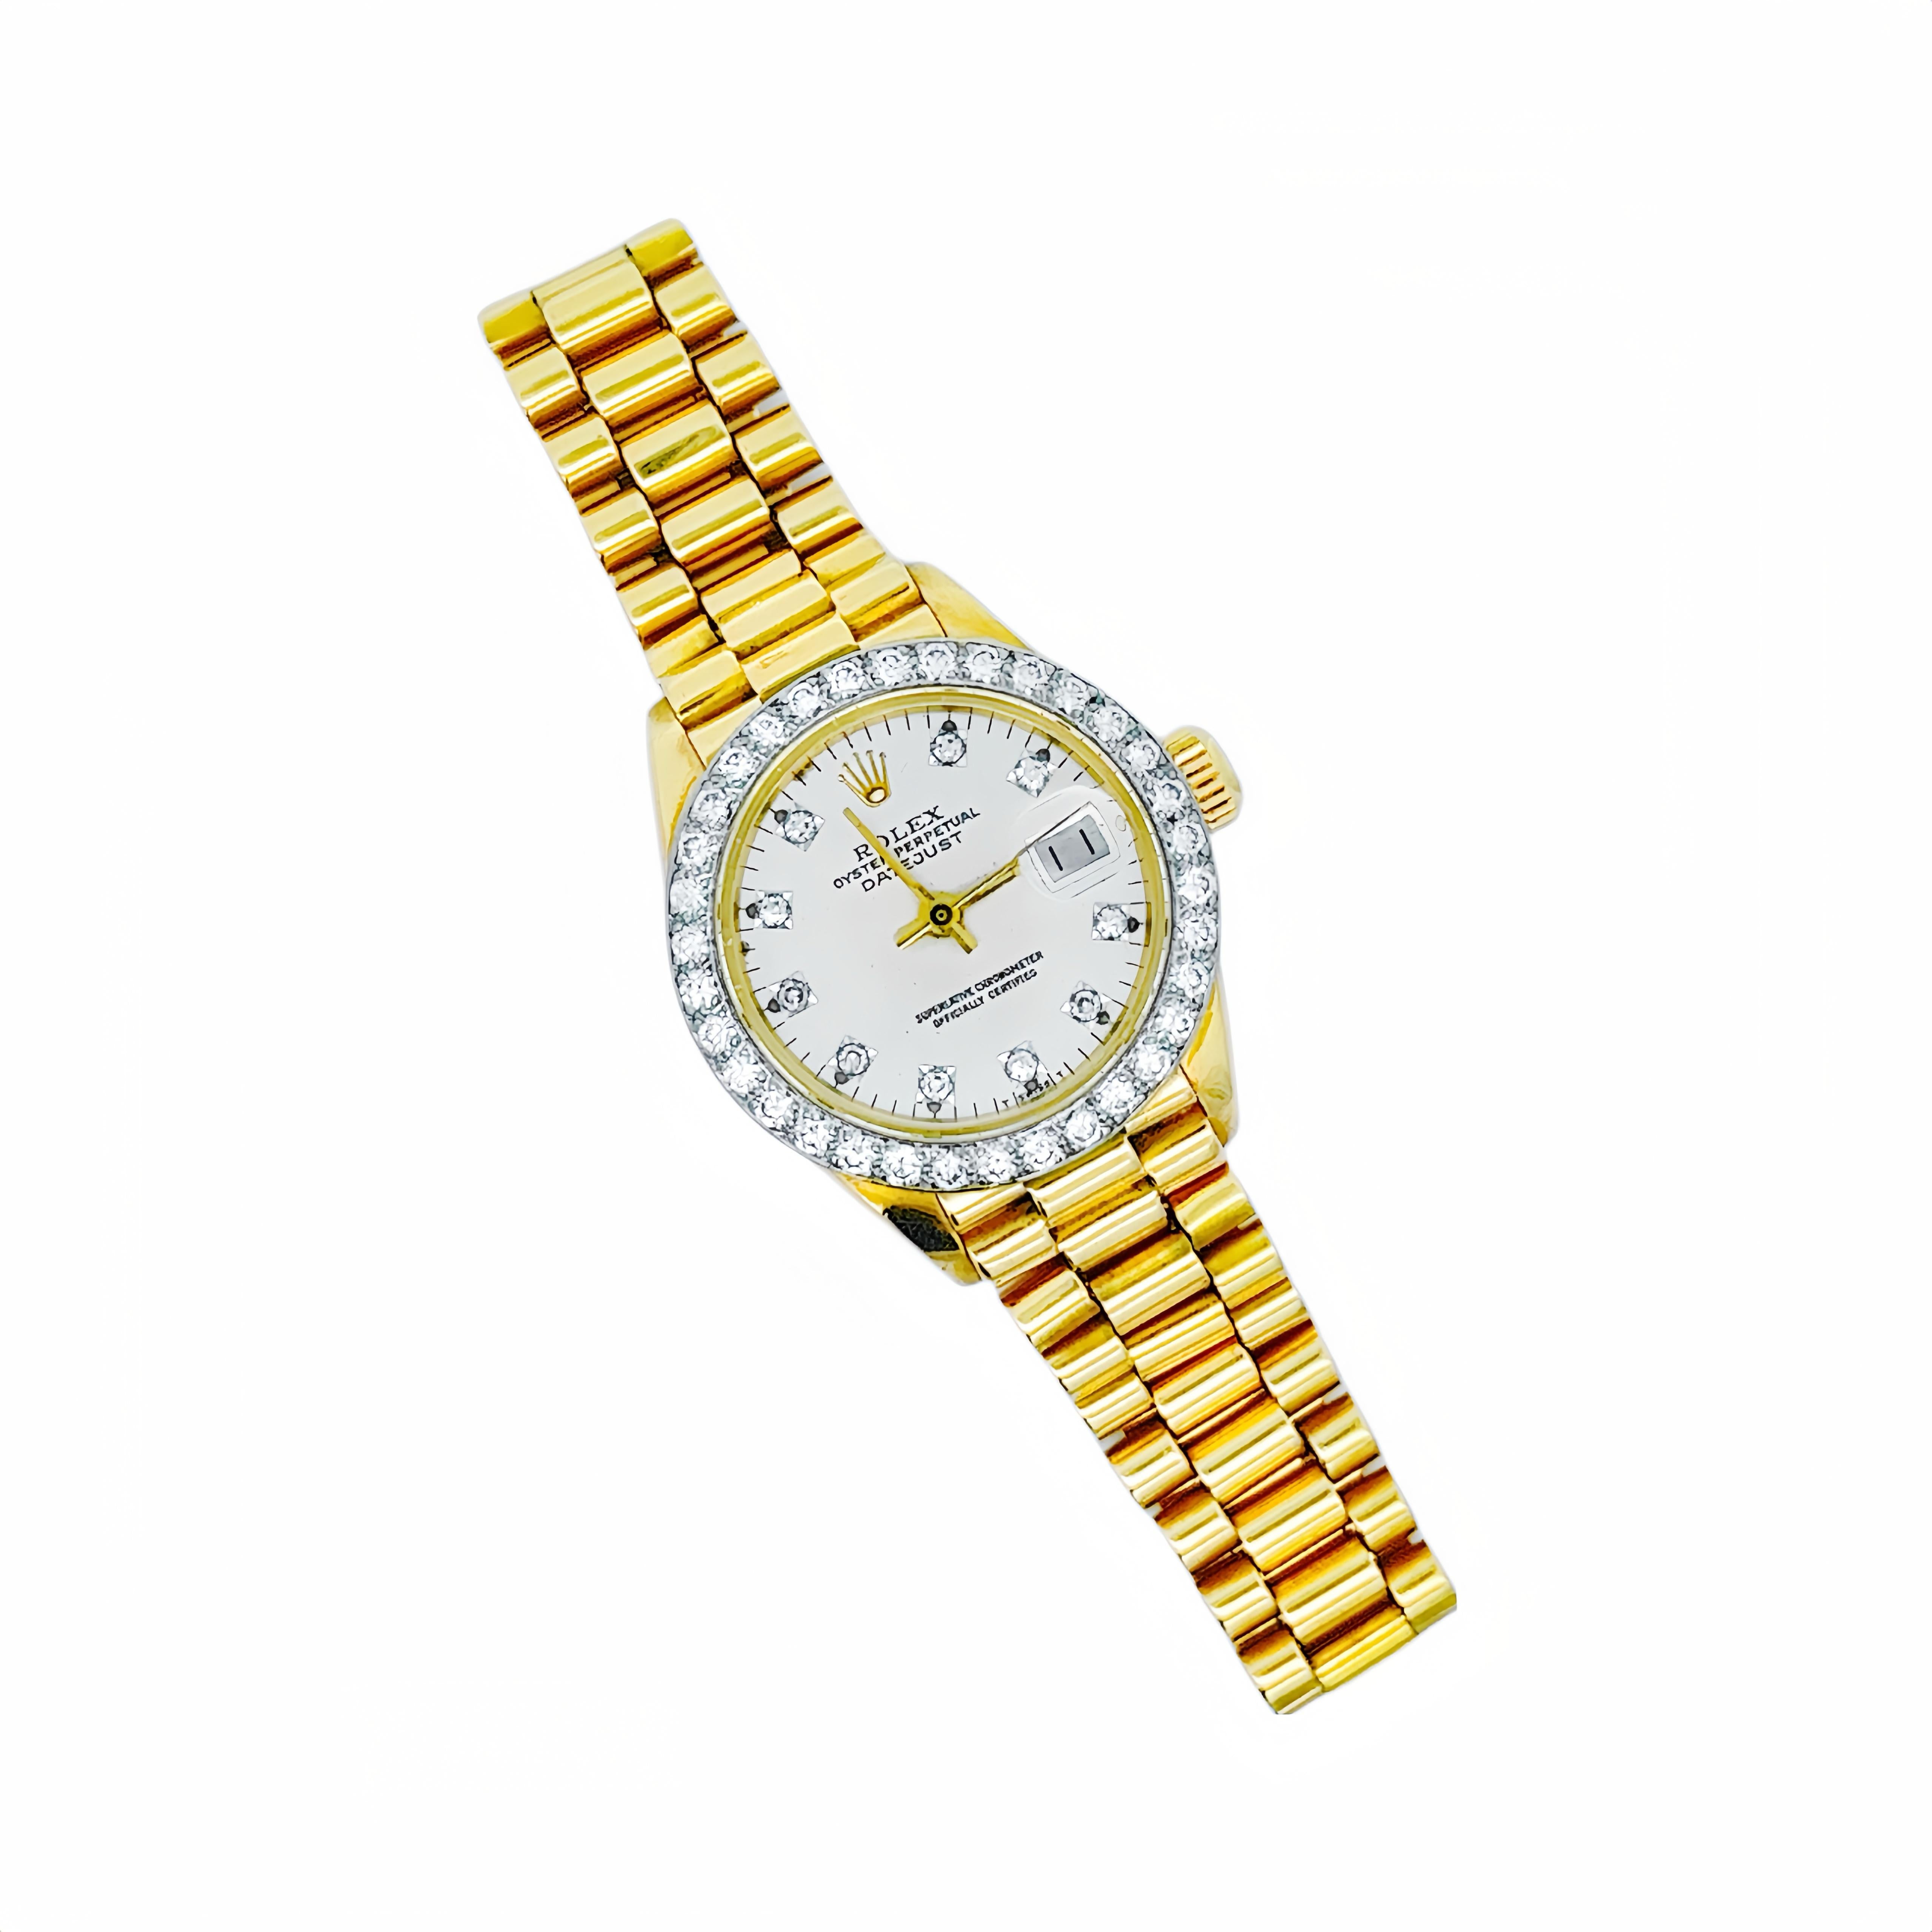 Rolex 26mm Datejust 18kt Gold Diamond Dial Diamond Bezel 6917

This watch is in like new condition. It has been polished and added diamonds on the bezel and dial. It has no visible scratches or blemishes.

Period
Cira 1970s

Model
Oyster Perpetual